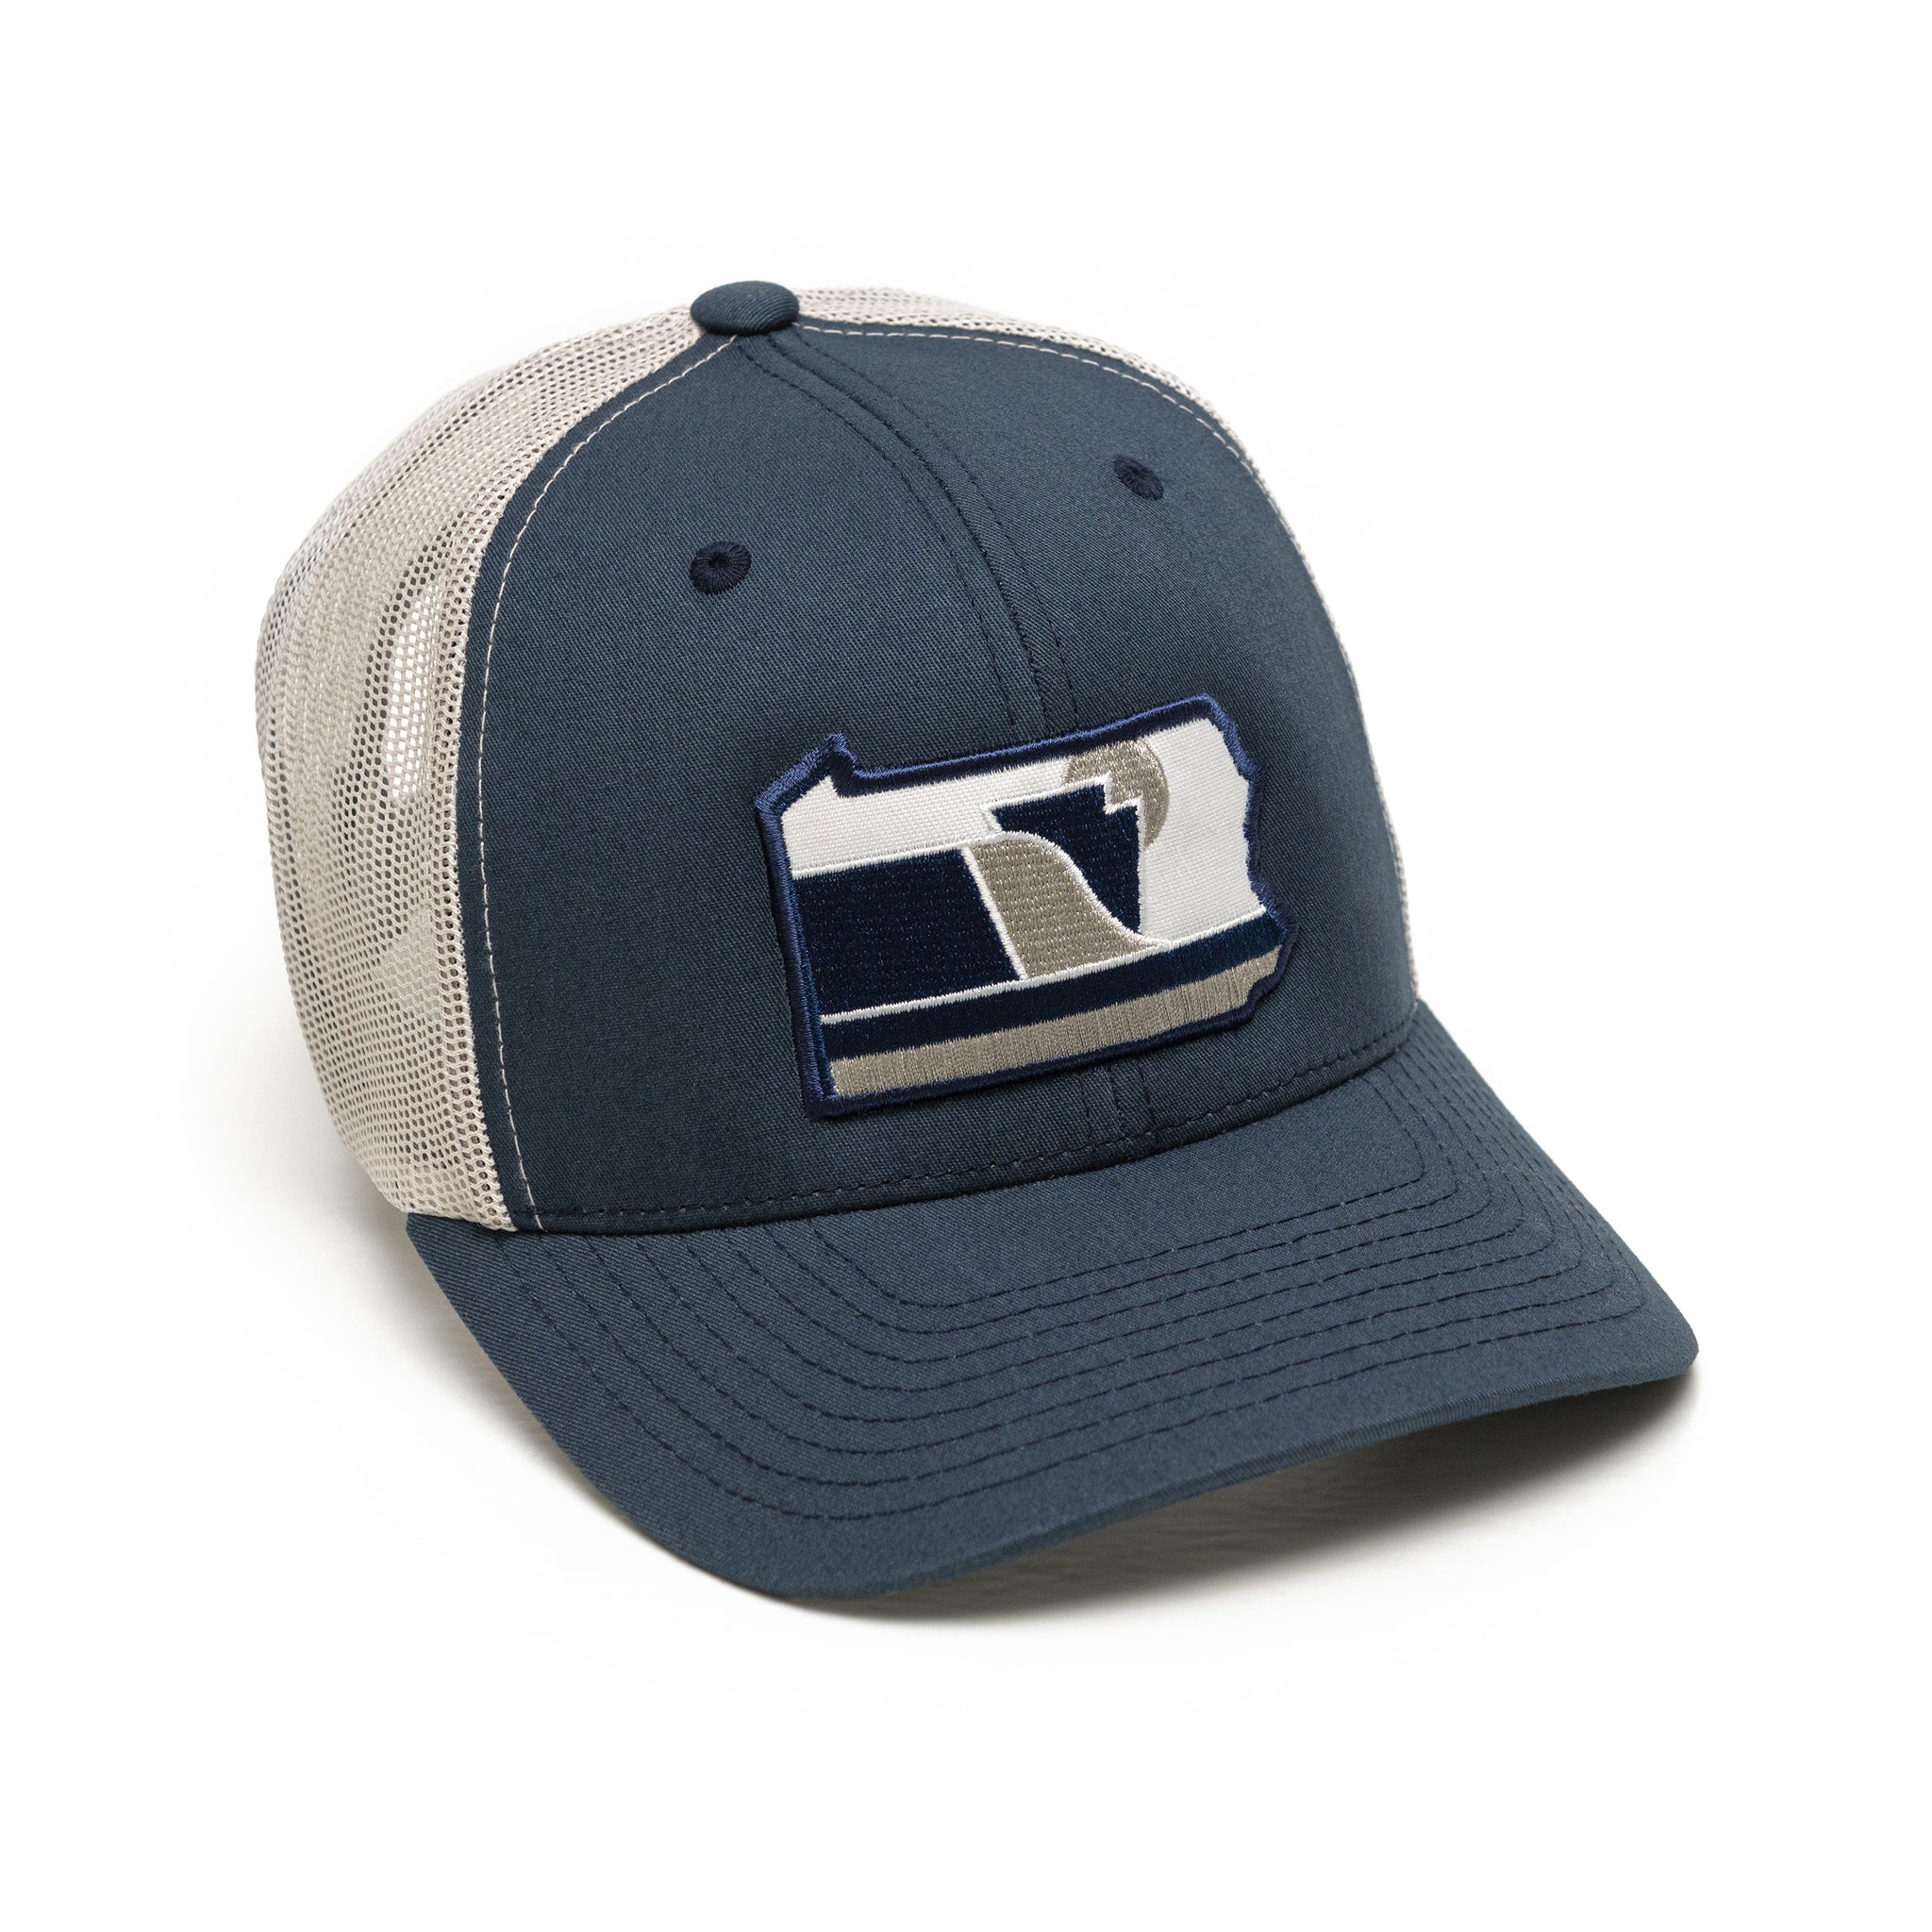 Rep Pa Co Nittany Trucker Hat